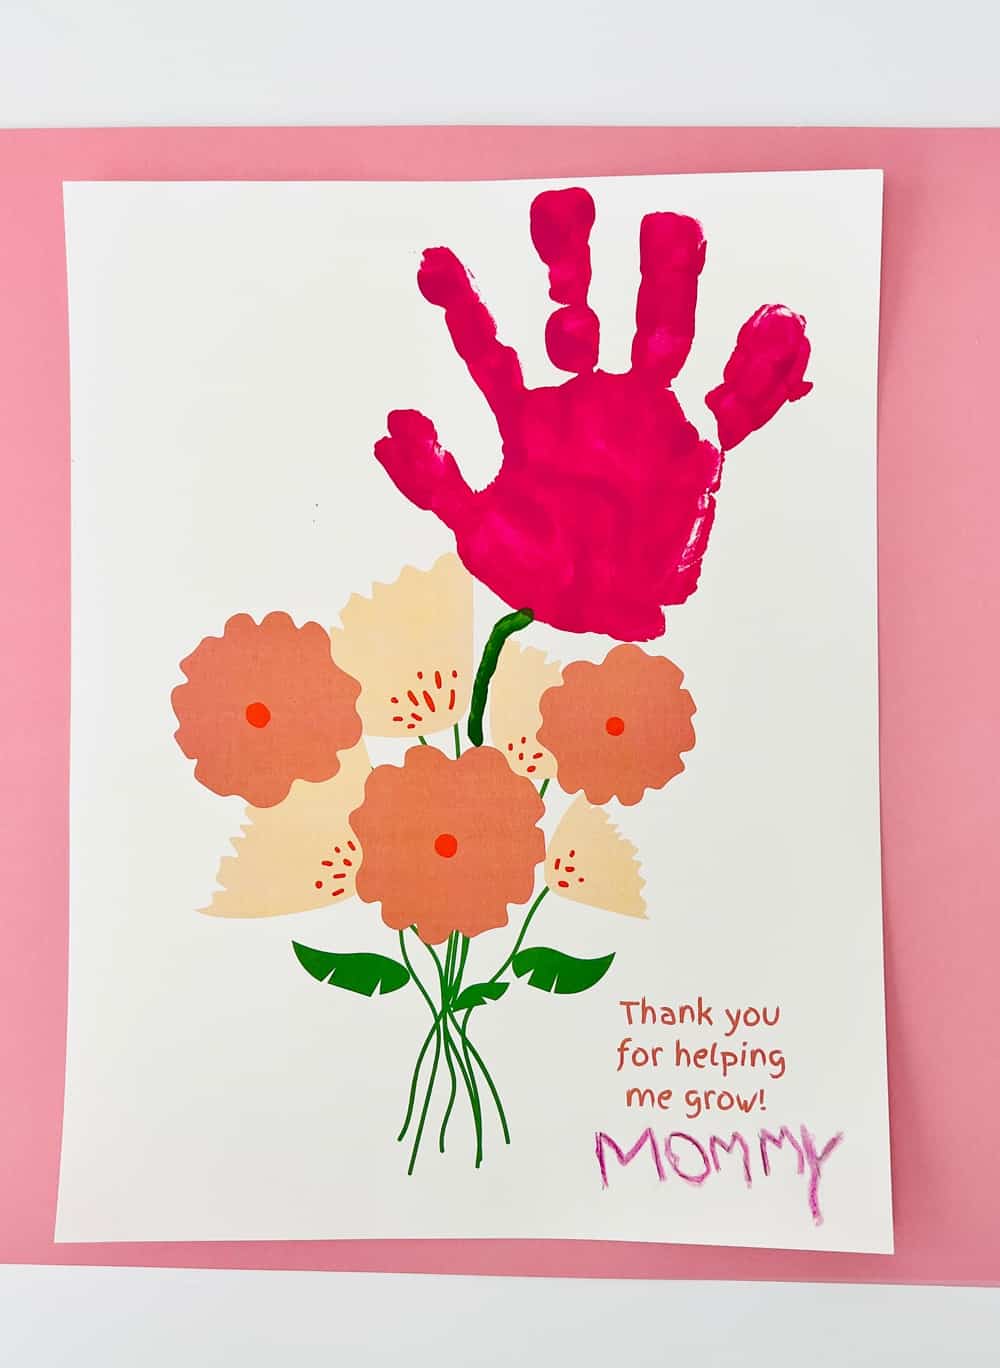 Mother's Day Handprint Art - Make Mom This Sweet Bouquet!